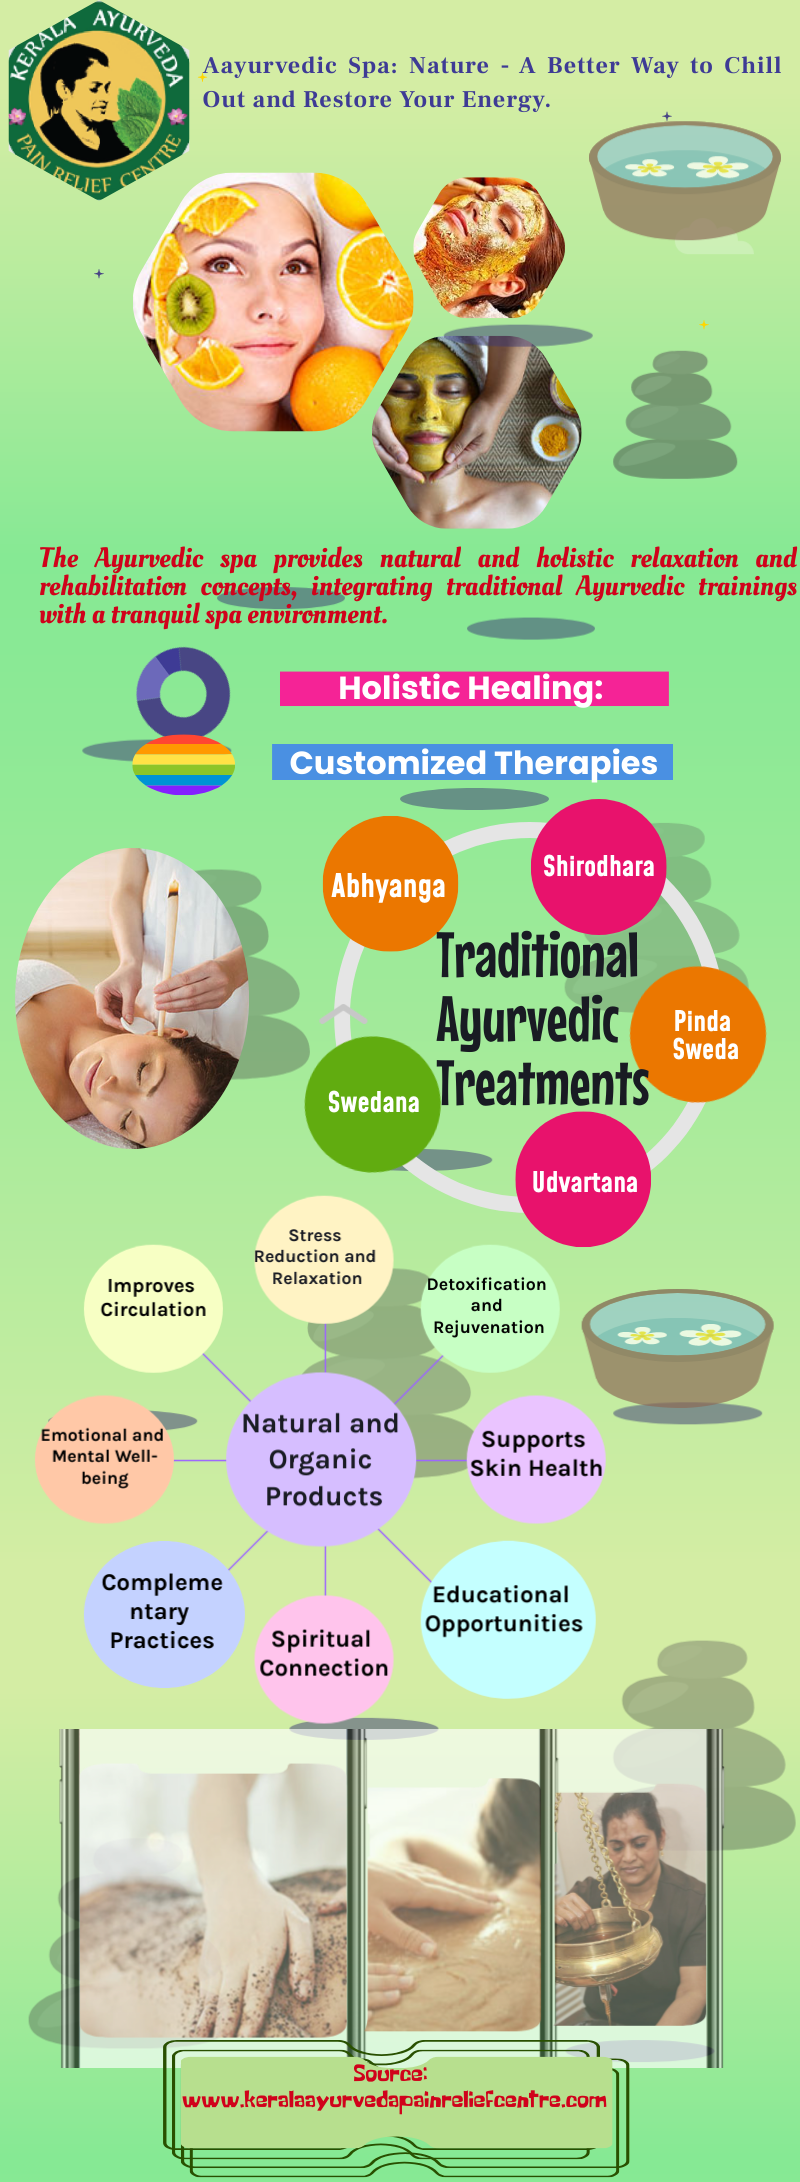 Aayurvedic Spa A Natural Way to Relax and Rejuvenate